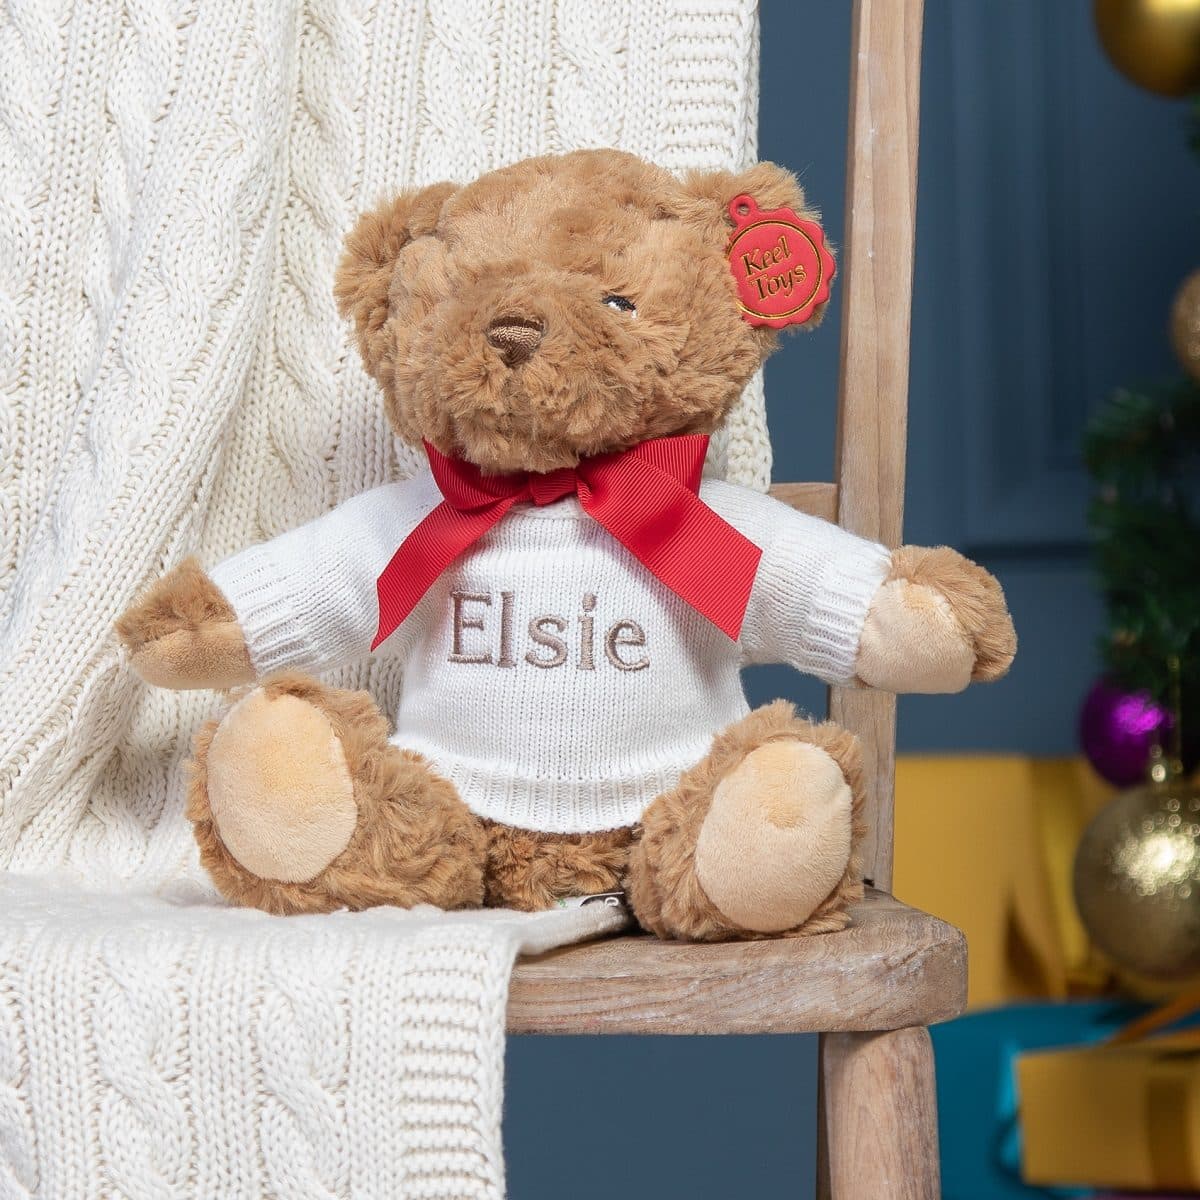 Personalised keeleco recycled medium teddy bear soft toy Birthday Gifts 2